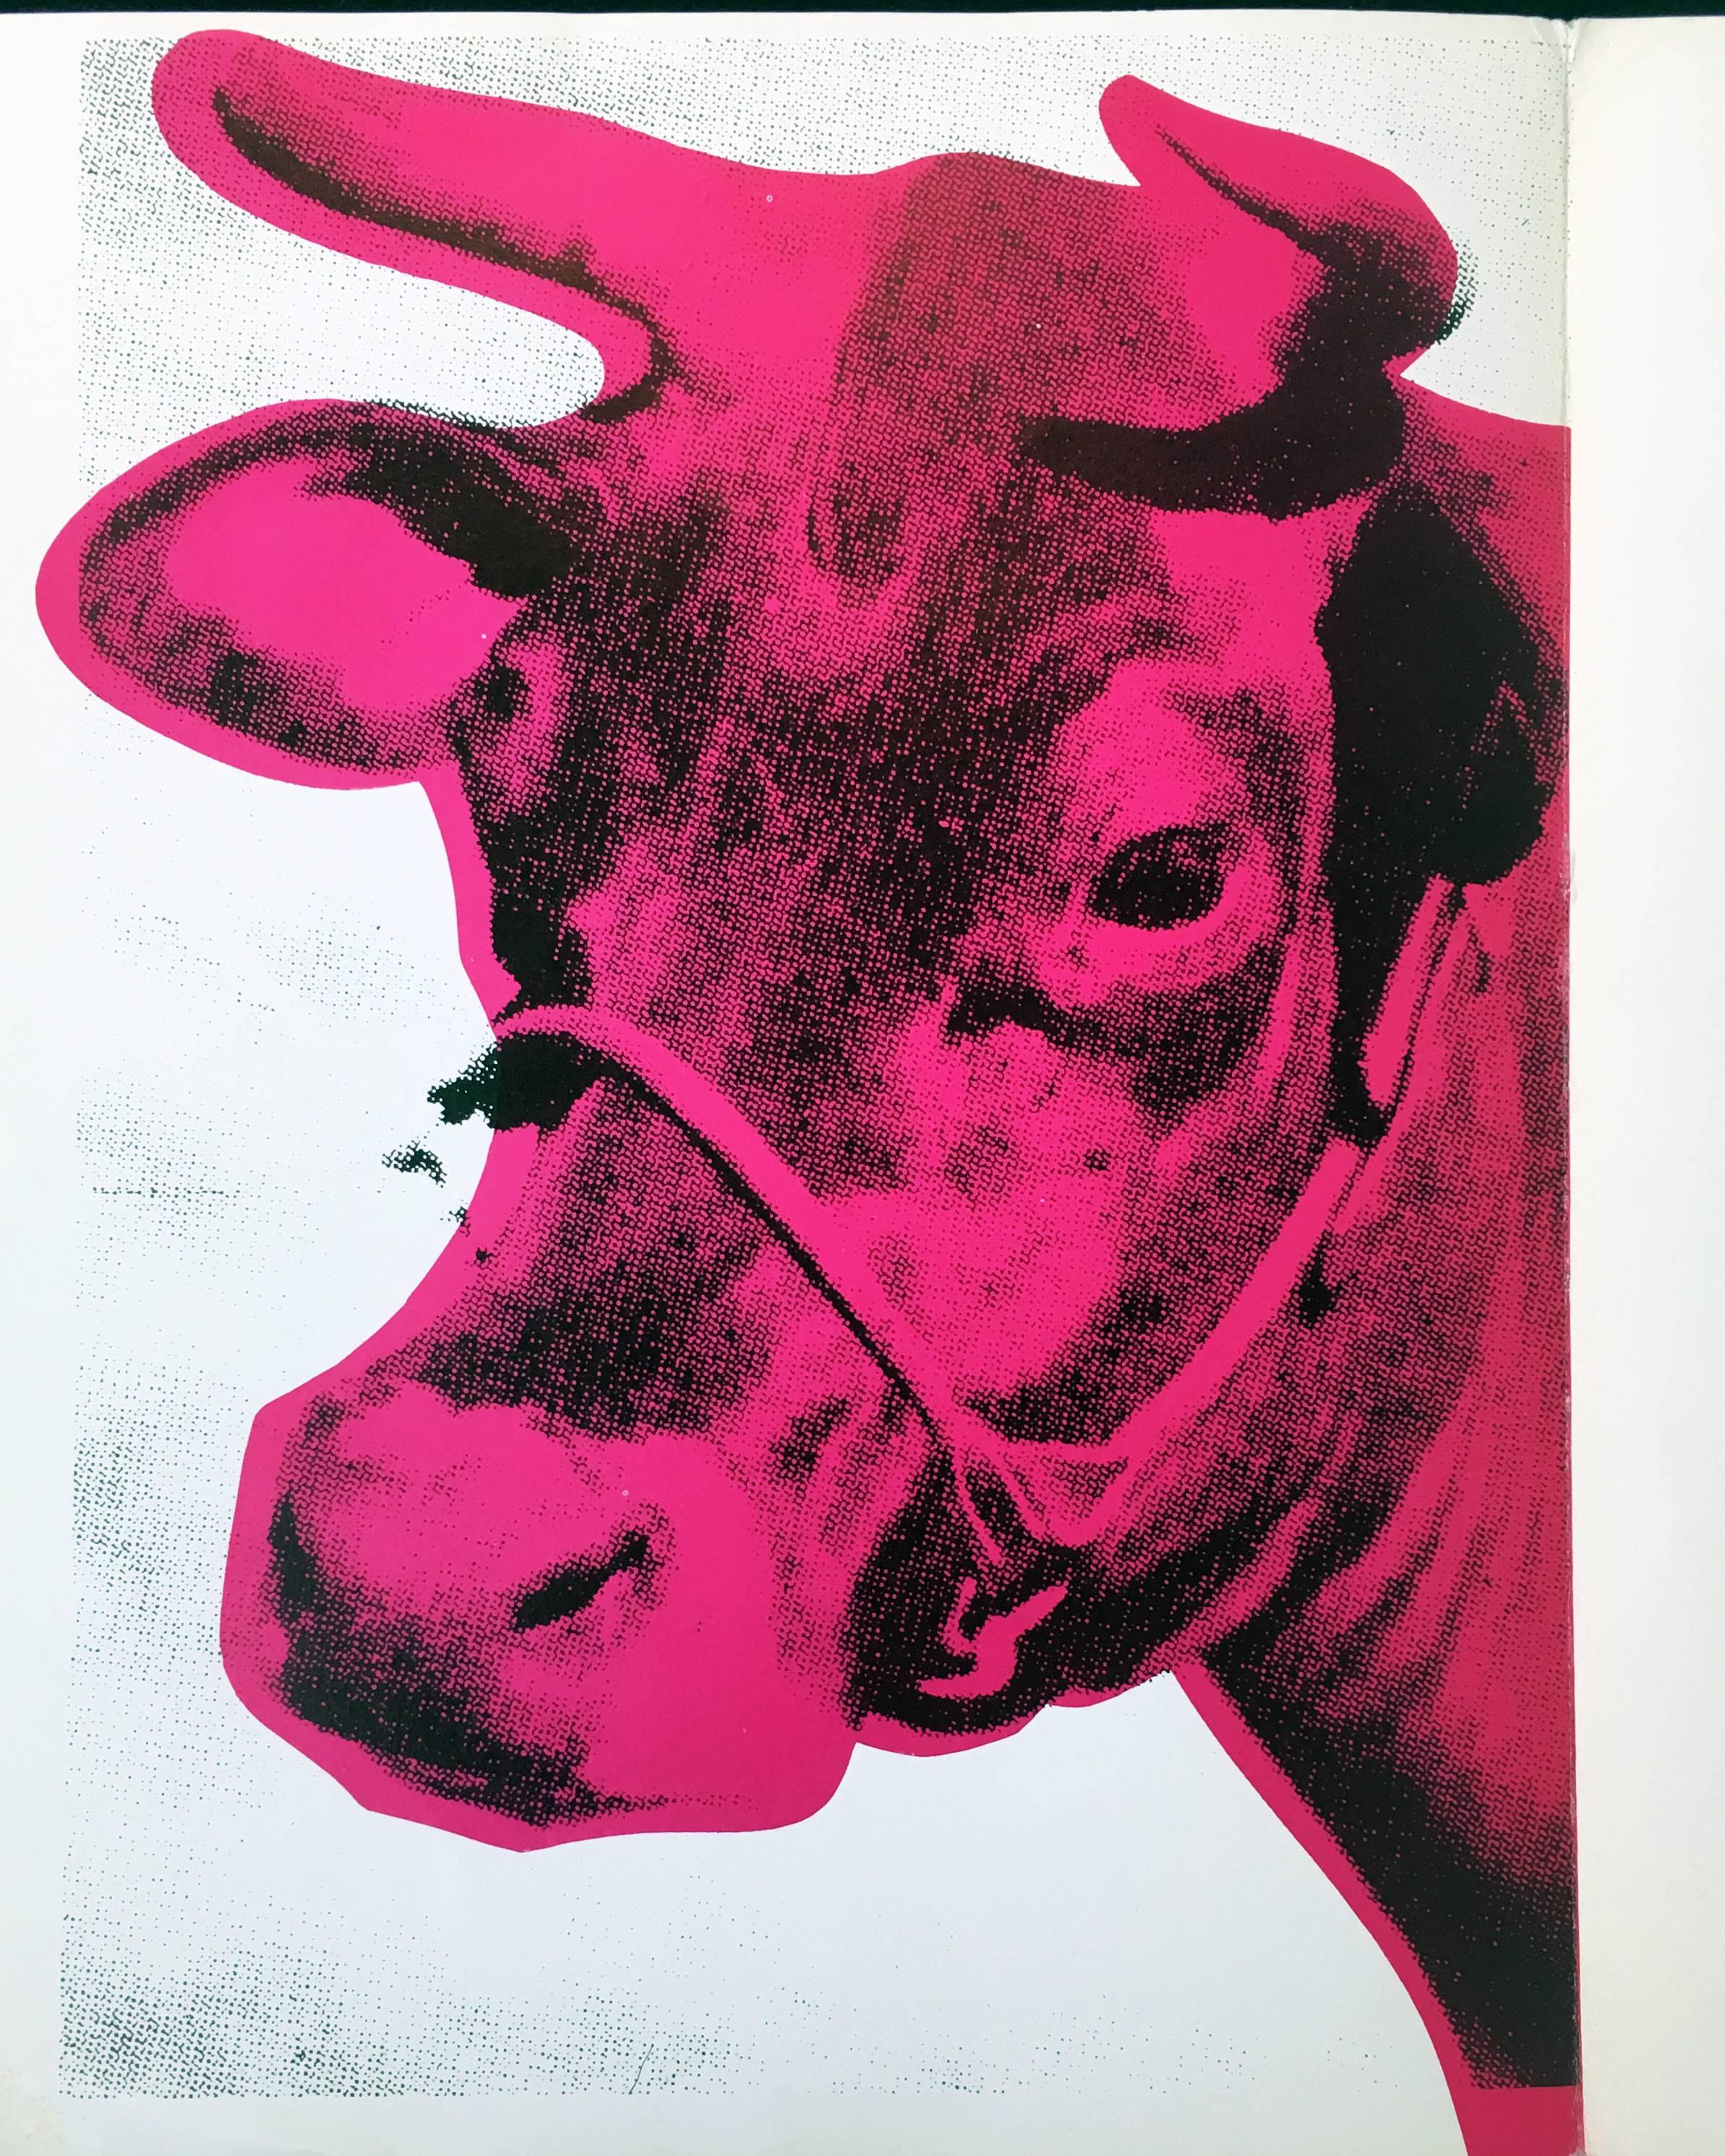 Andy Warhol Musee d’Art Moderne catalog (Warhol Cow)  - Pop Art Print by (after) Andy Warhol